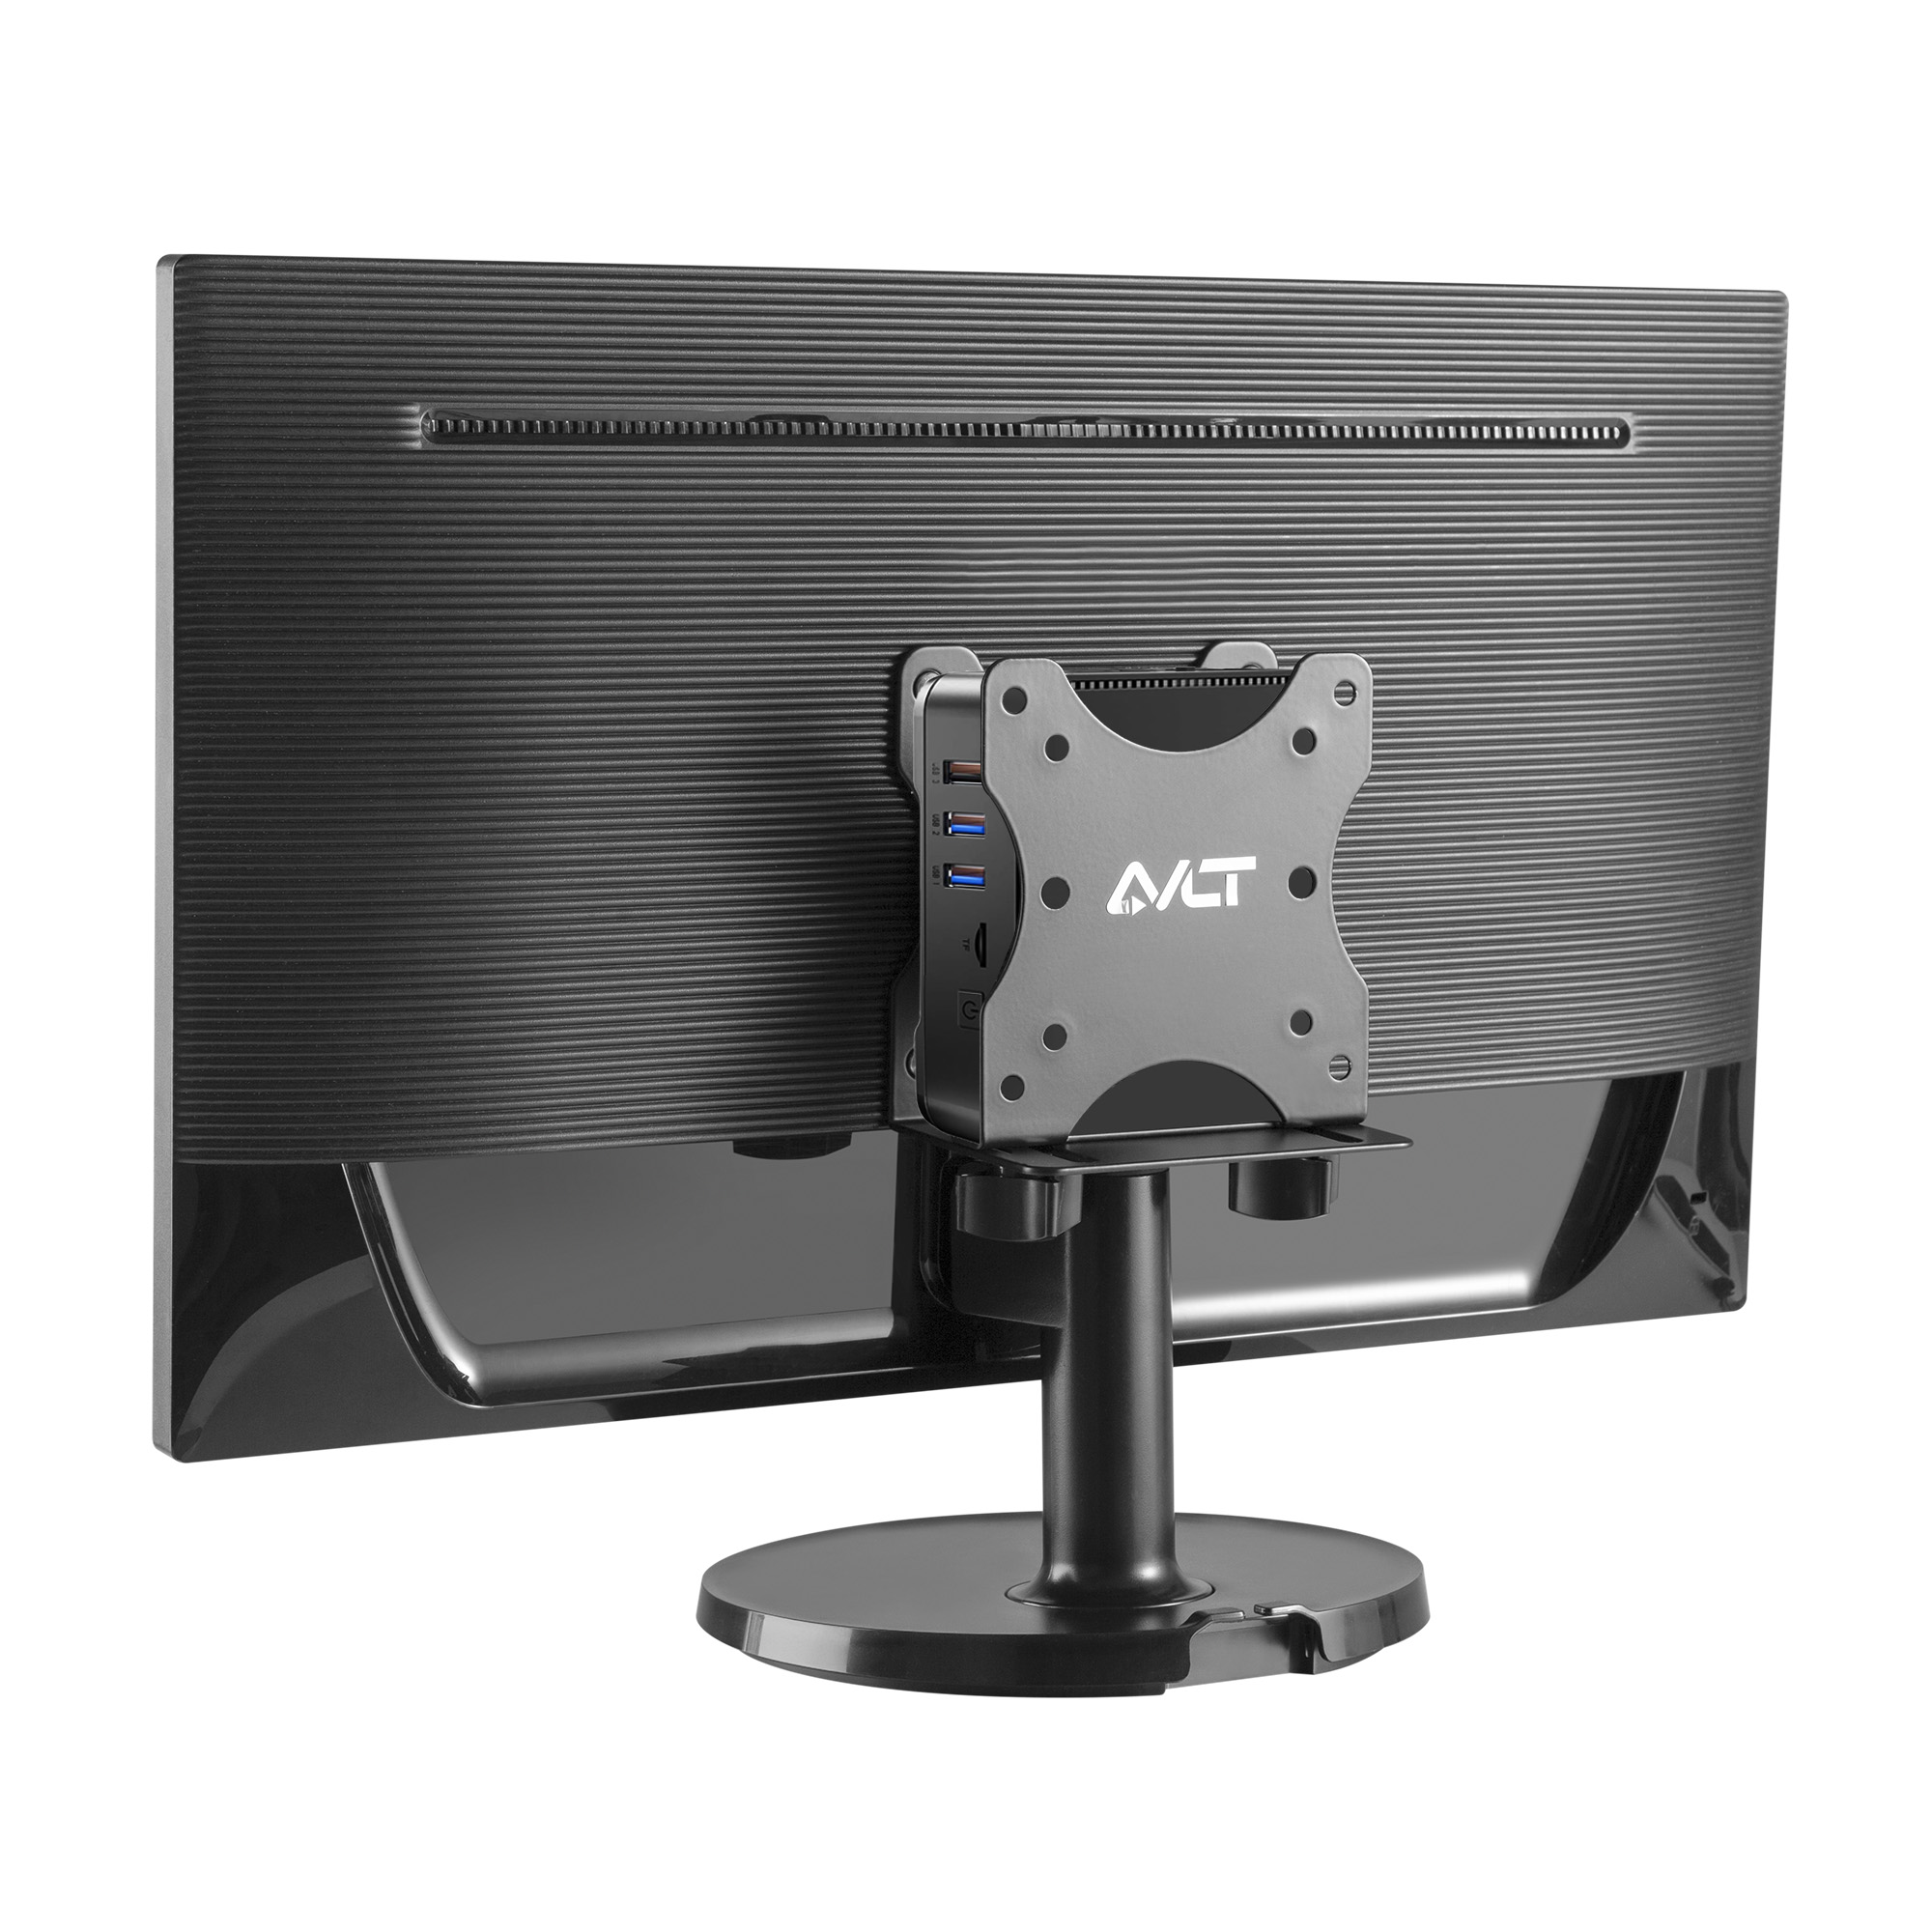 AVLT Thin Client VESA Mount for NUC Mini PC Up to 2.76" Thick Fits Monitor Back, Monitor Arm Stand, Pole Or Under Desk | AVLT® | Found by AVLAB